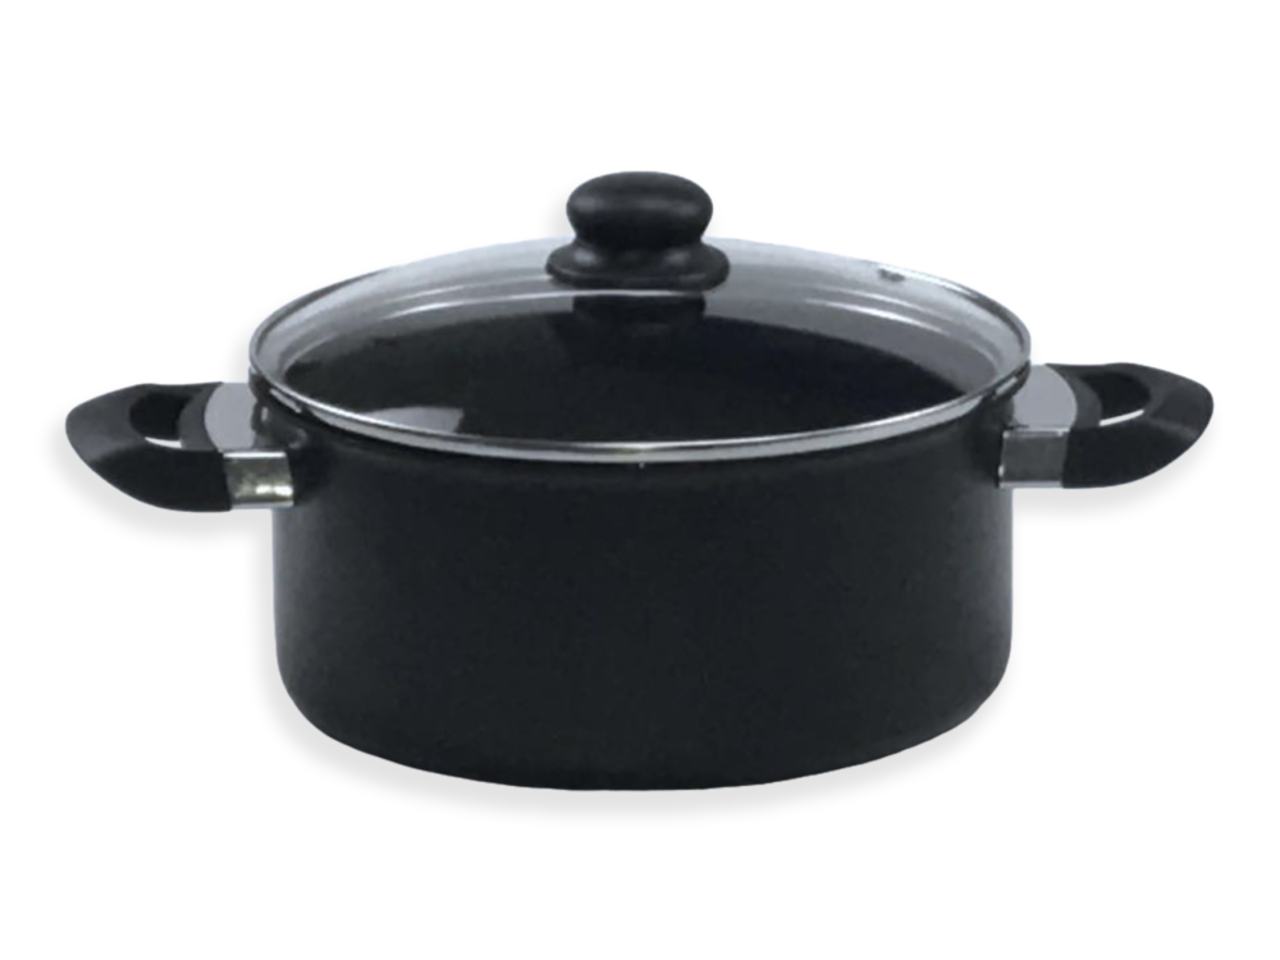 https://media-www.canadiantire.ca/product/living/kitchen/cookware/1423497/simplicite-5-quart-non-stick-saucepan-ab461727-45aa-4a30-88c9-bd15c1db12dd.png?imdensity=1&imwidth=640&impolicy=mZoom